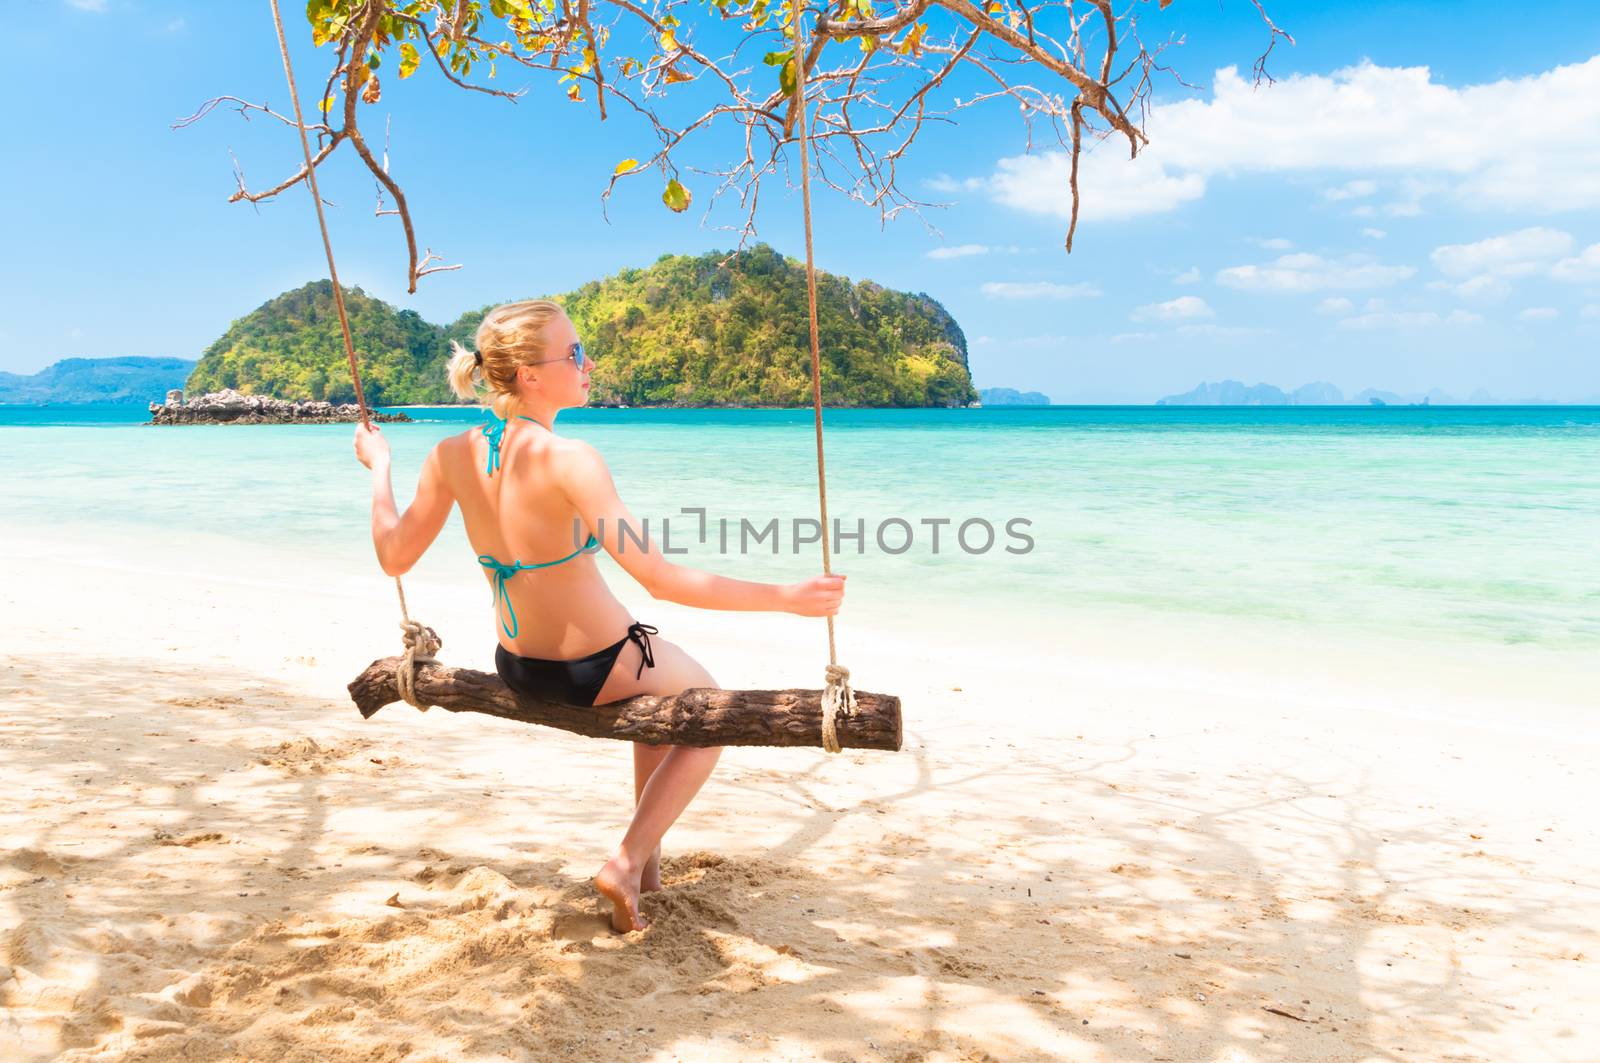 Lady swinging on the tropical beach by kasto